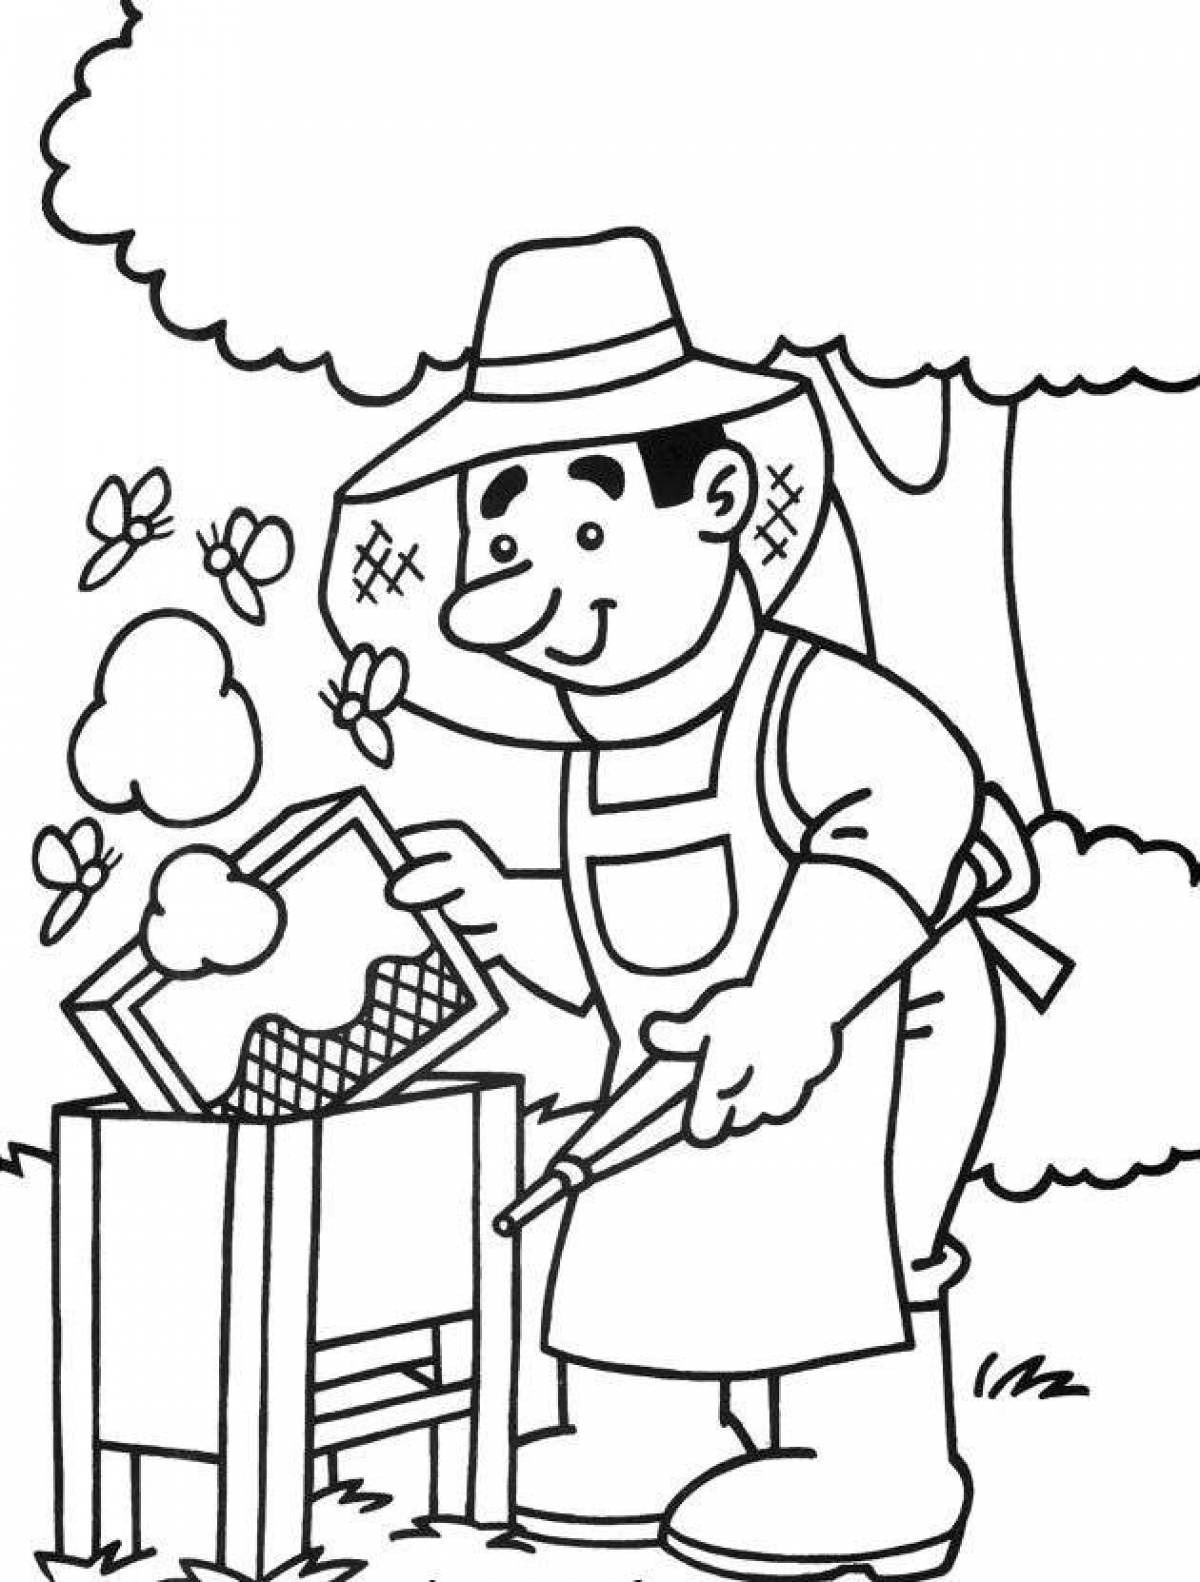 Crazy profession coloring book for kids 7 years old